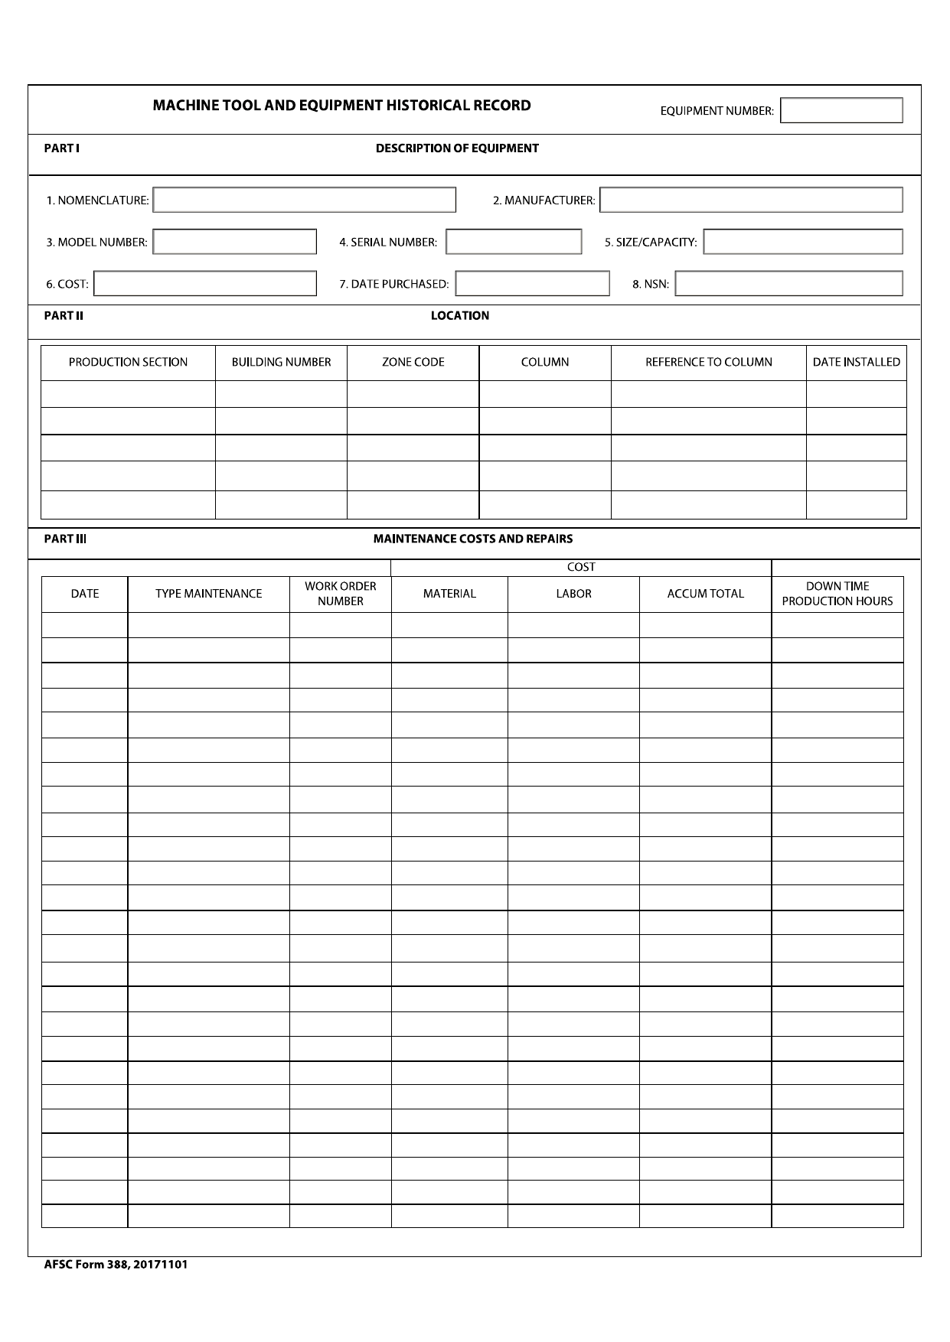 AFSC Form 388 Machine Tool and Equipment Historical Record, Page 1